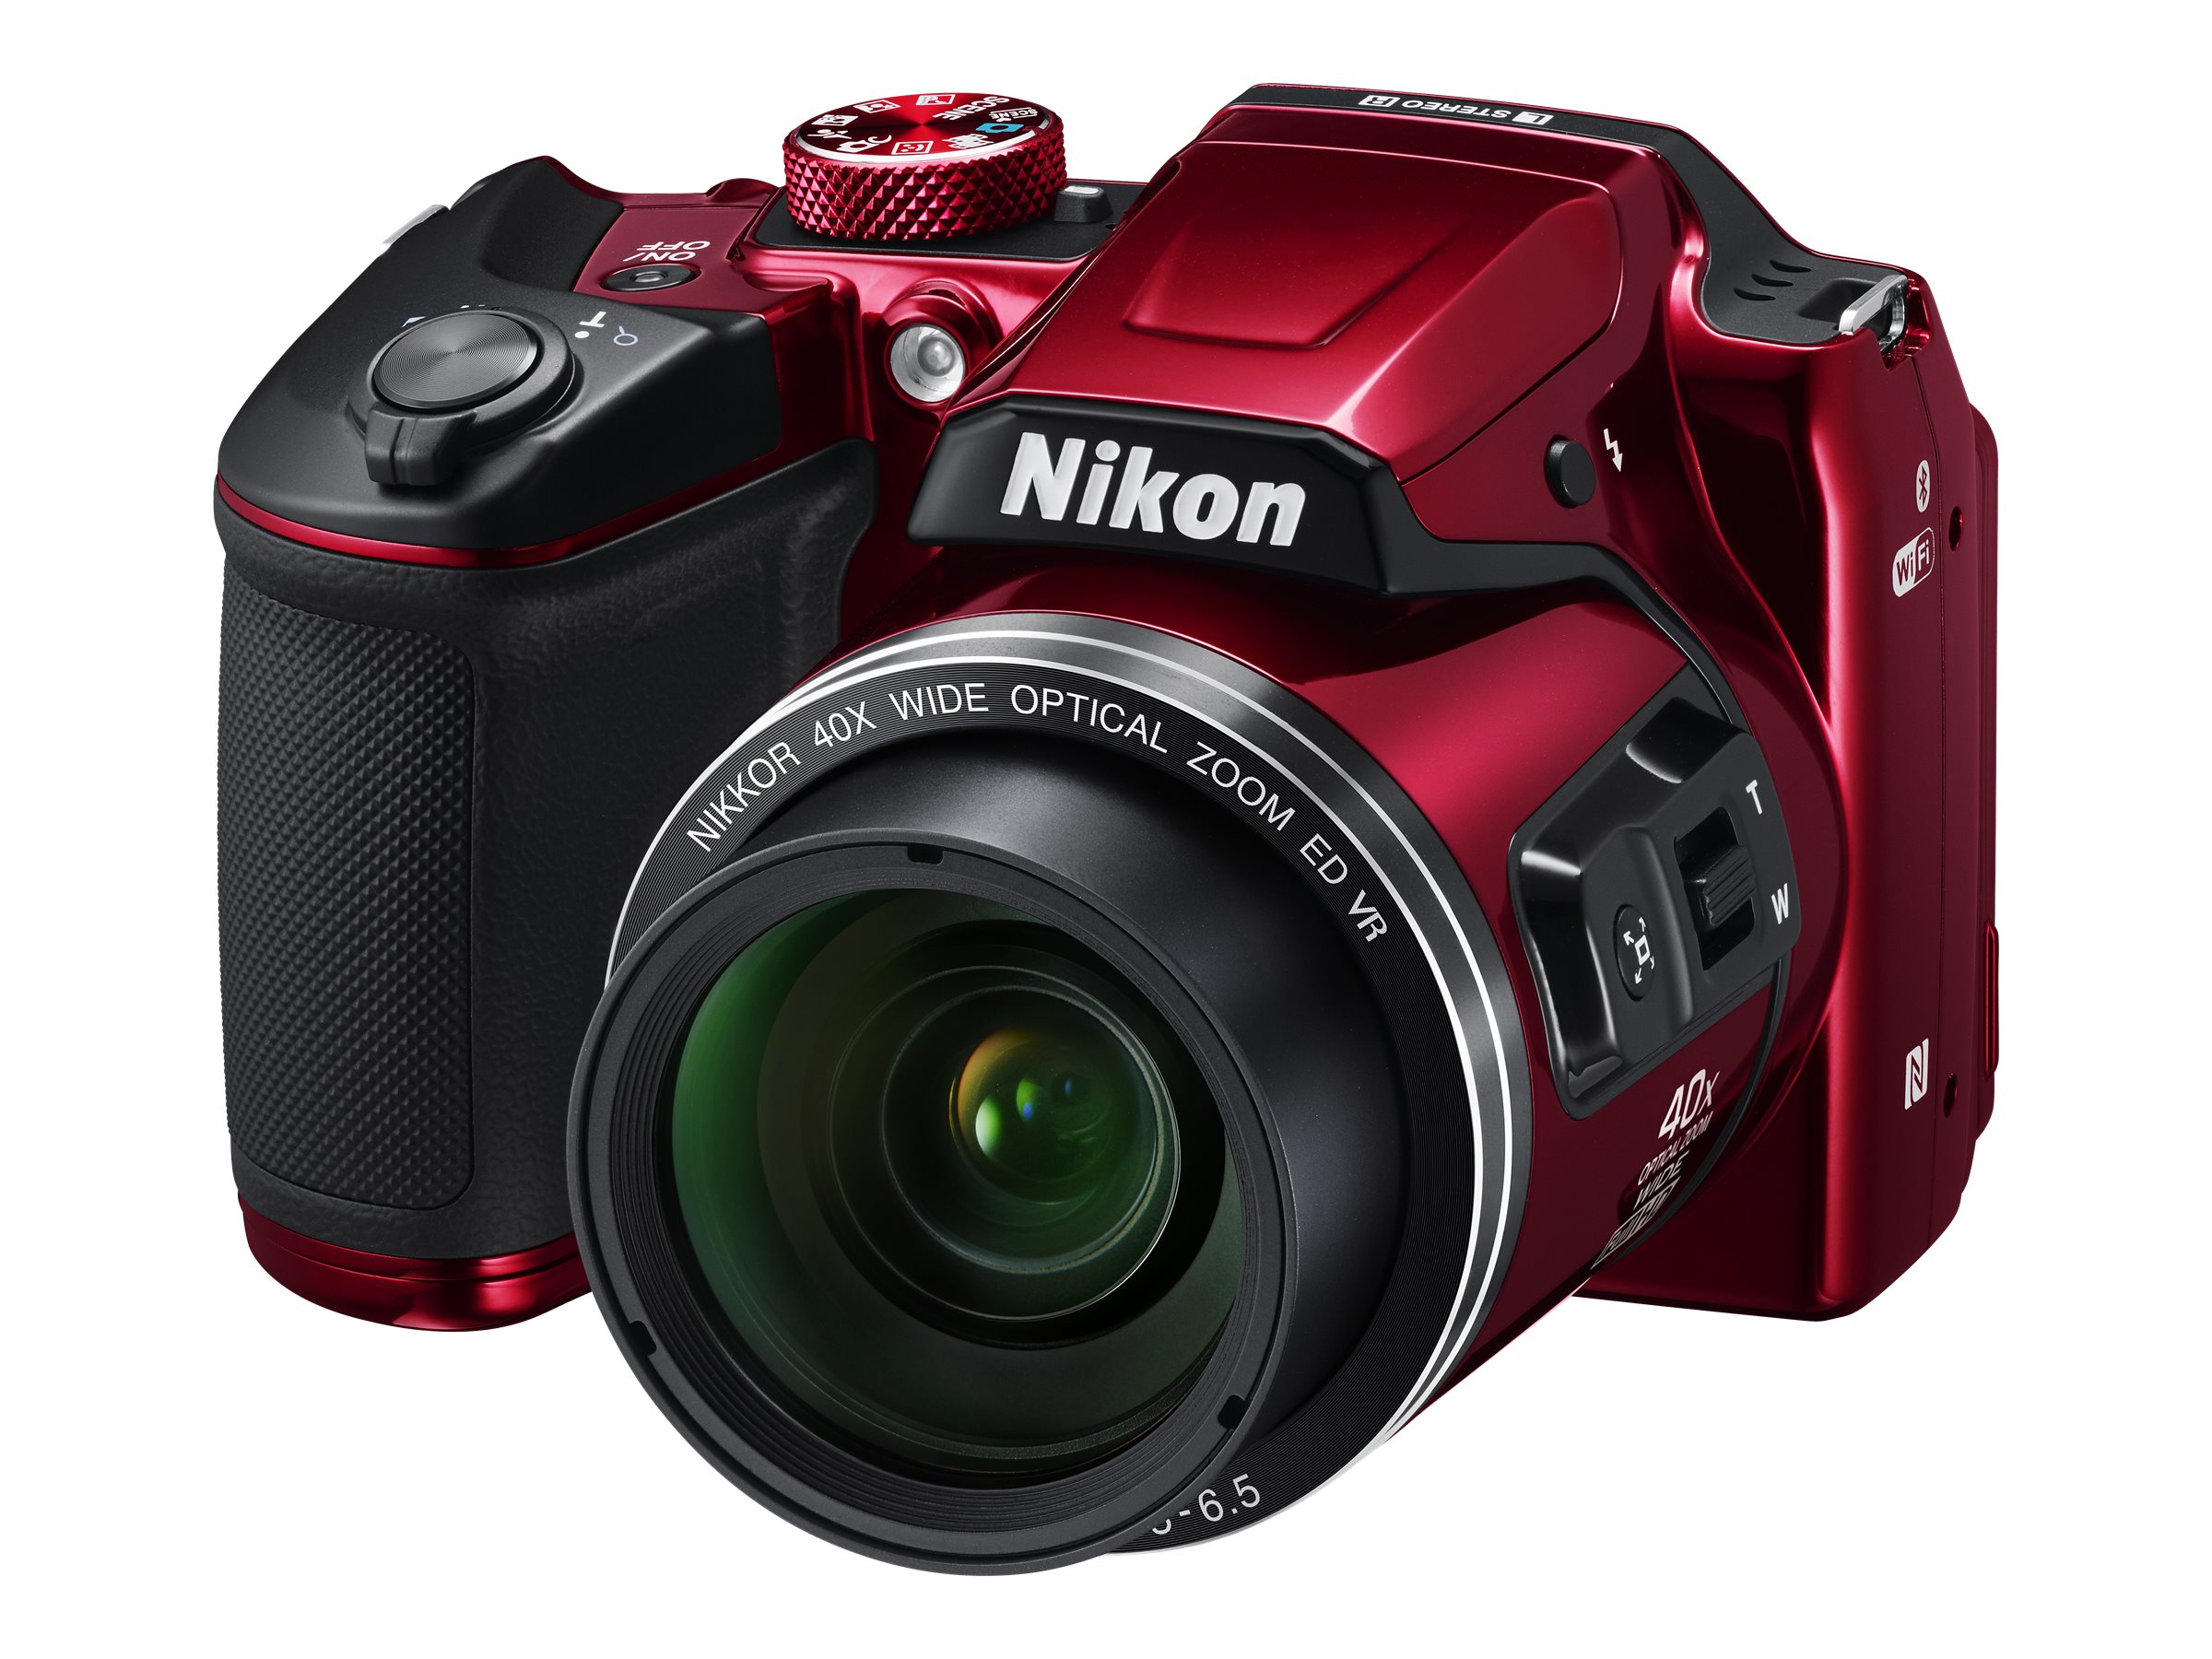 Nikon Red COOLPIX B500 Digital Camera with 16 Megapixels and 40x Optical Zoom - image 1 of 11